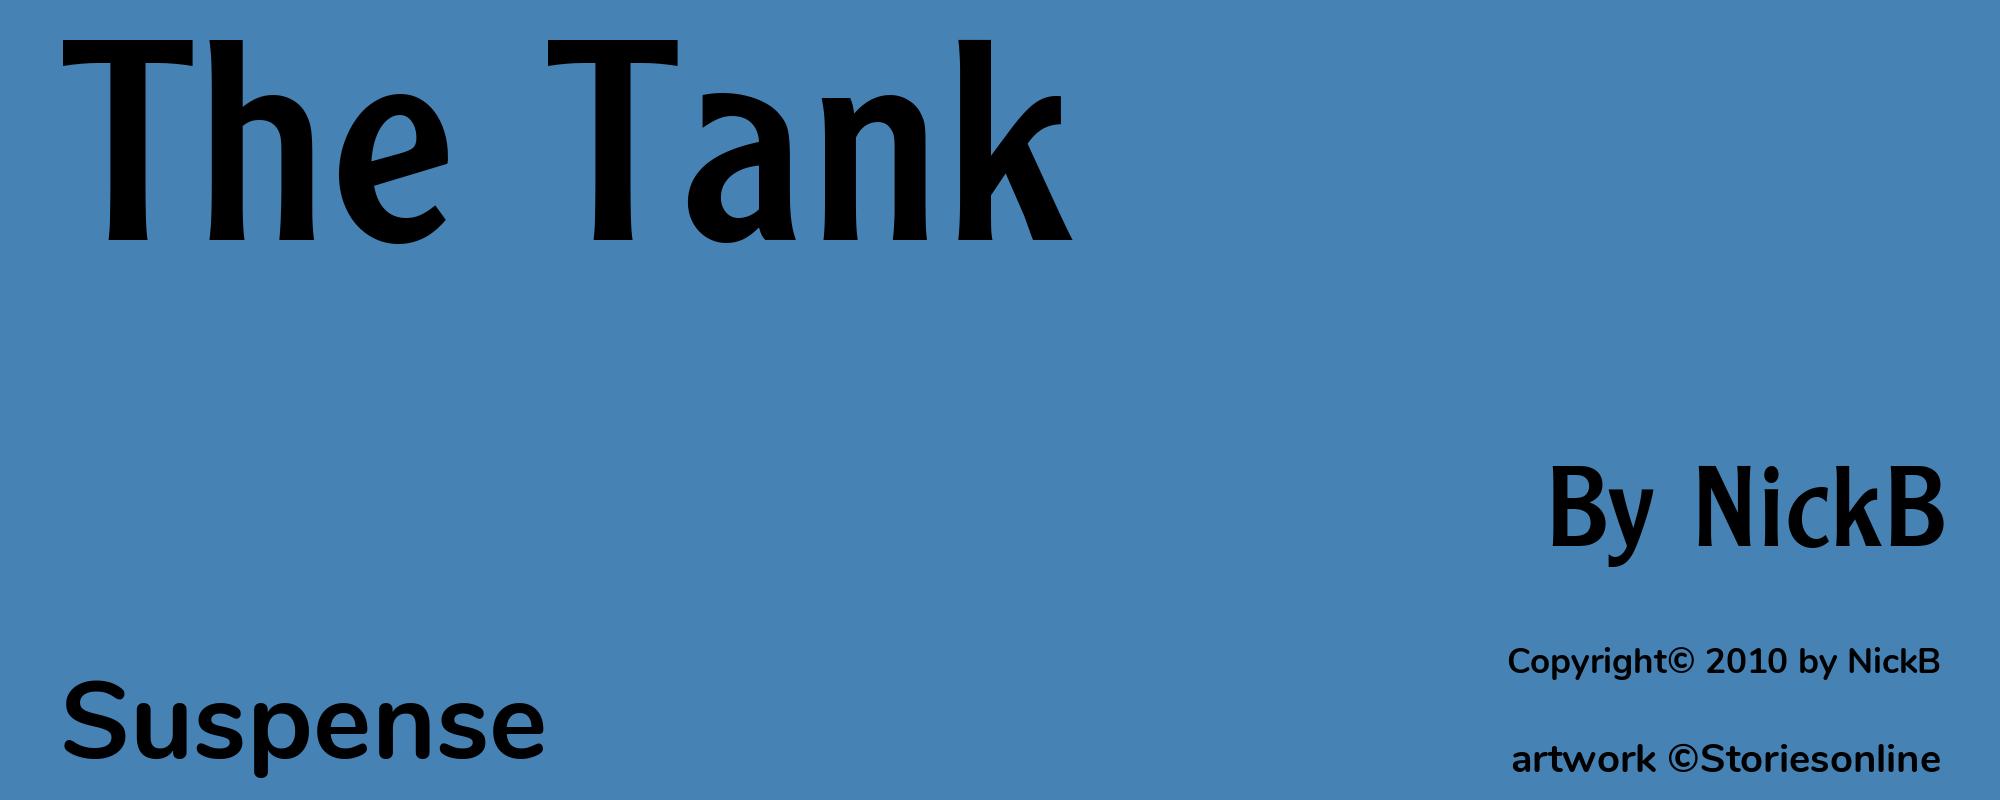 The Tank - Cover